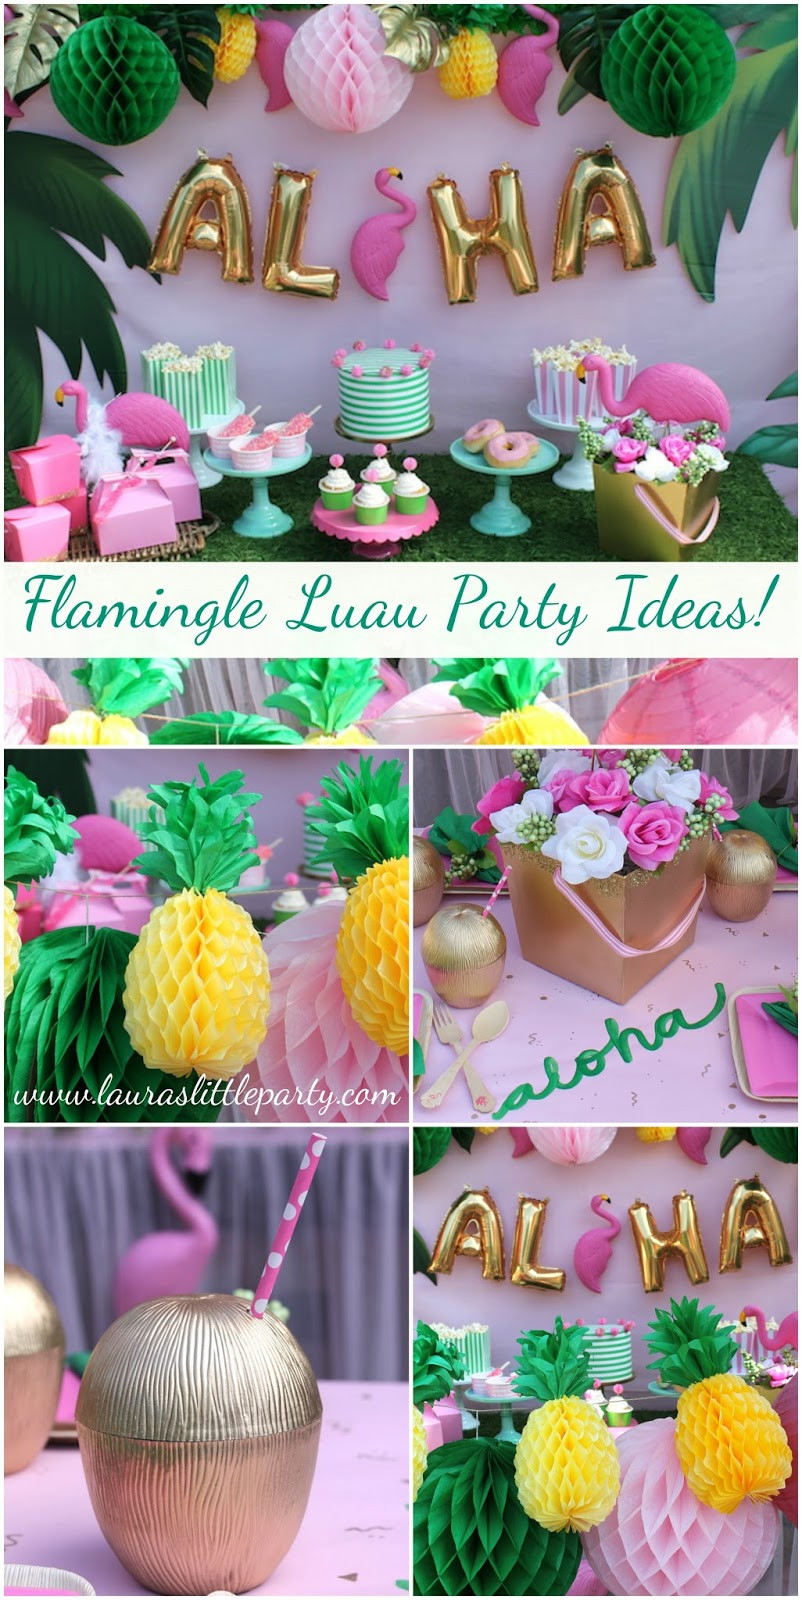 Summer Bday Party Ideas
 Let s Flamingle Luau Summer Party Ideas LAURA S little